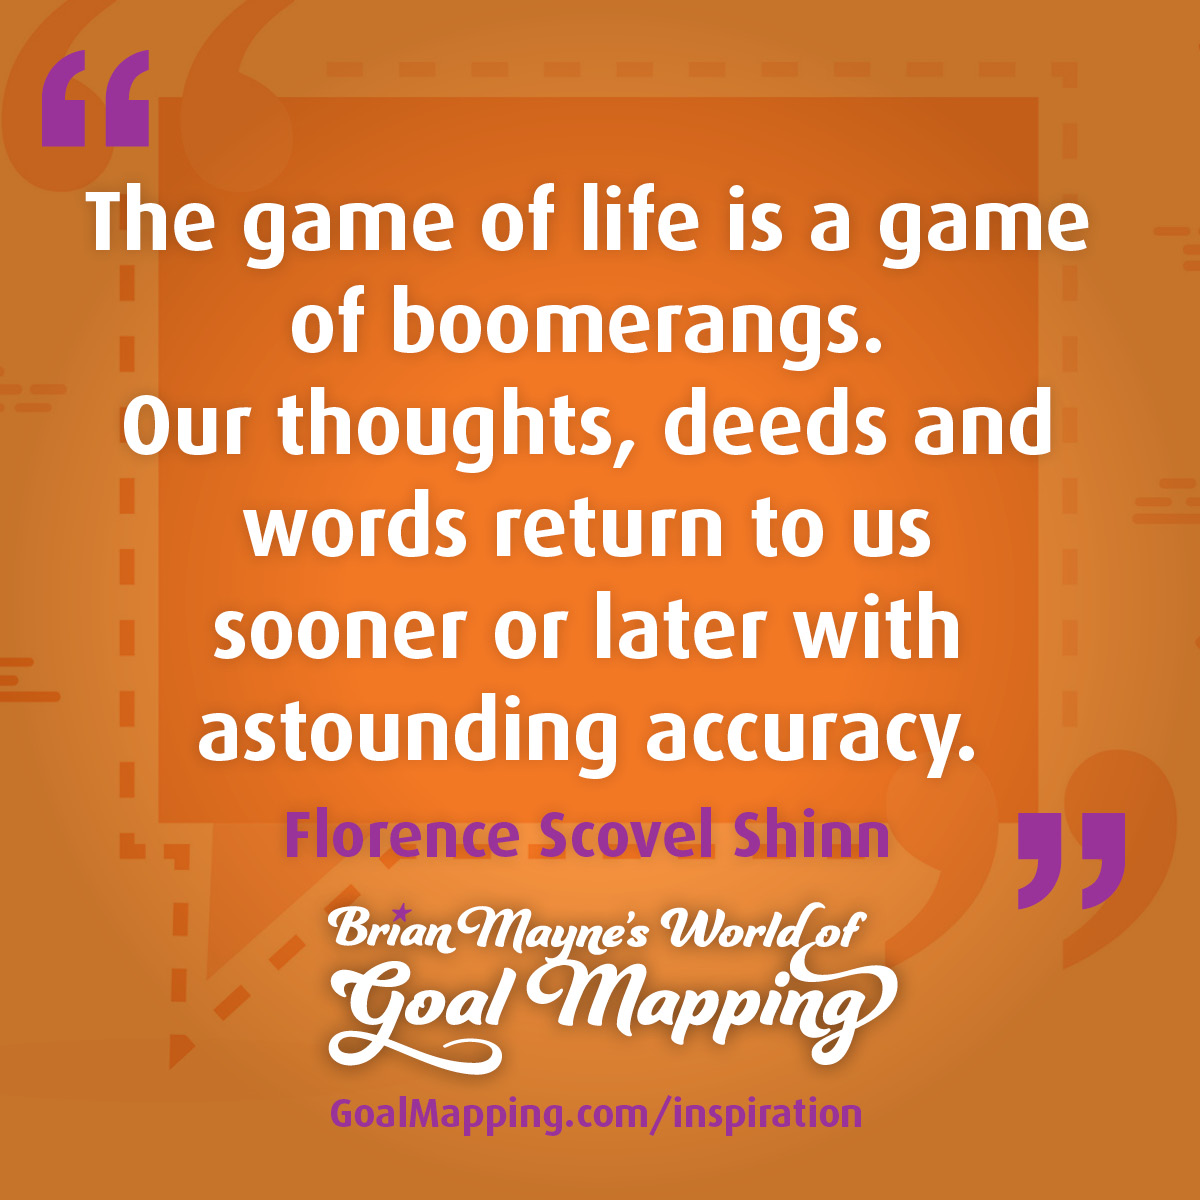 "The game of life is a game of boomerangs. Our thoughts, deeds and words return to us sooner or later with astounding accuracy."  Florence Scovel Shinn